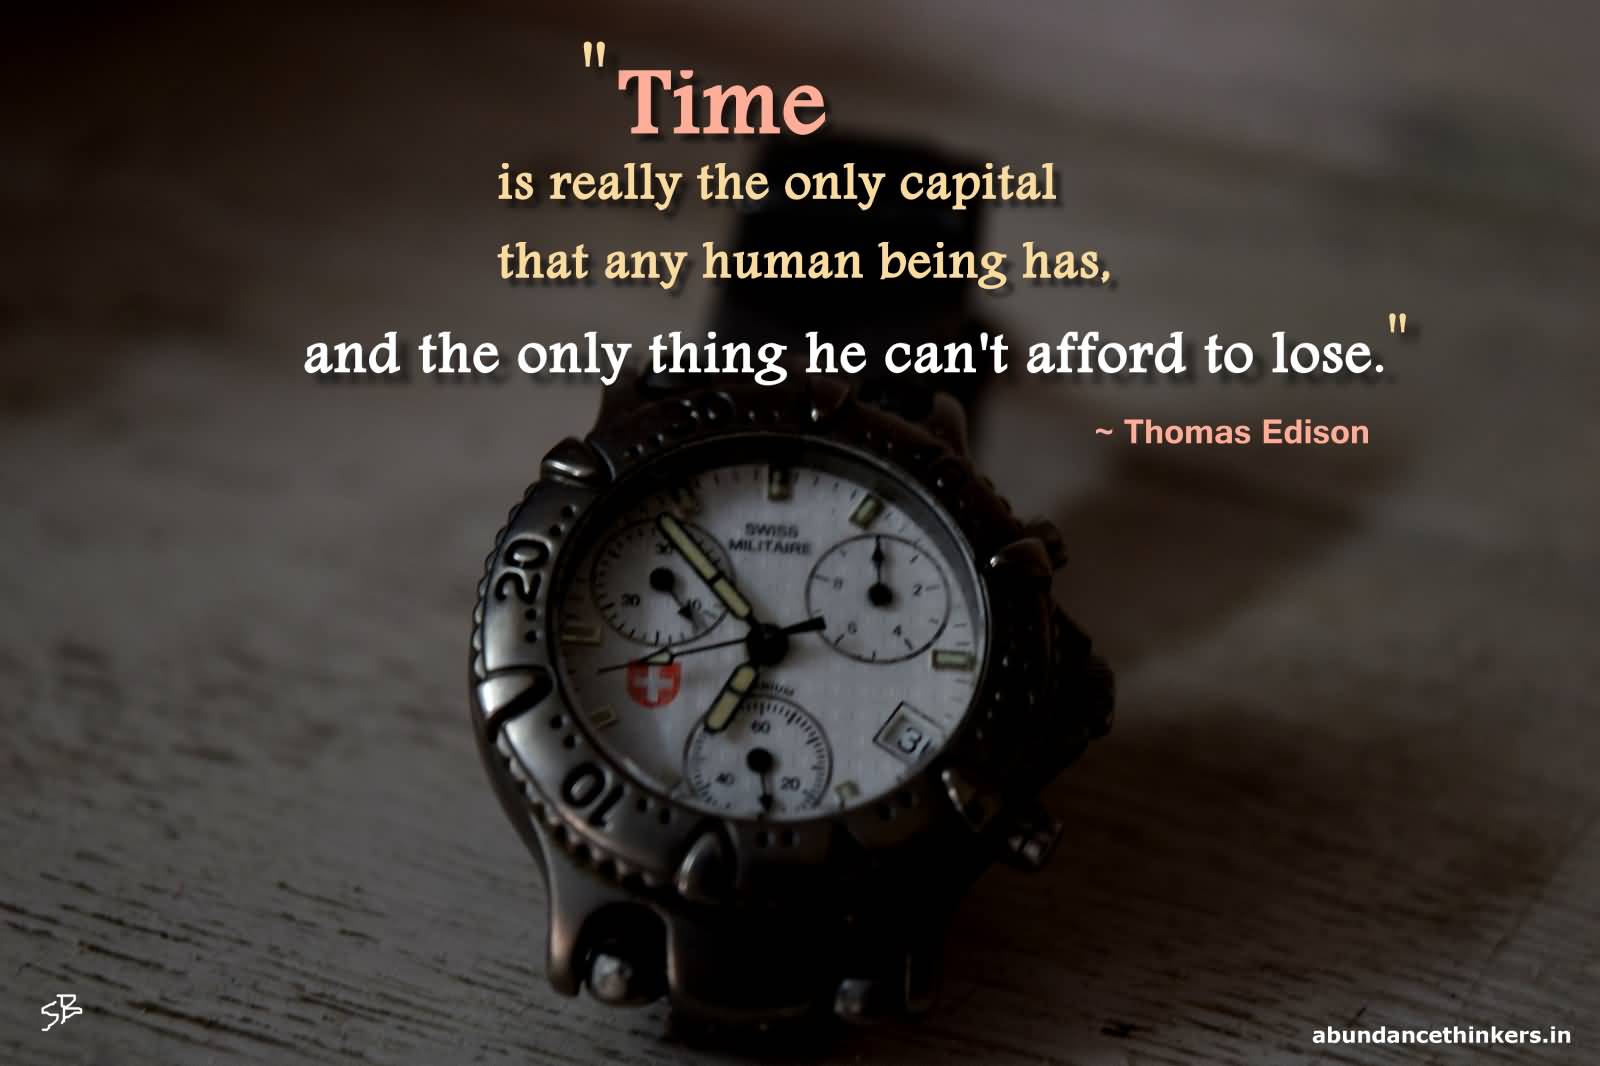 Time is really the only capital that any human being has, and the only thing he can’t afford to lose. Thomas Edison